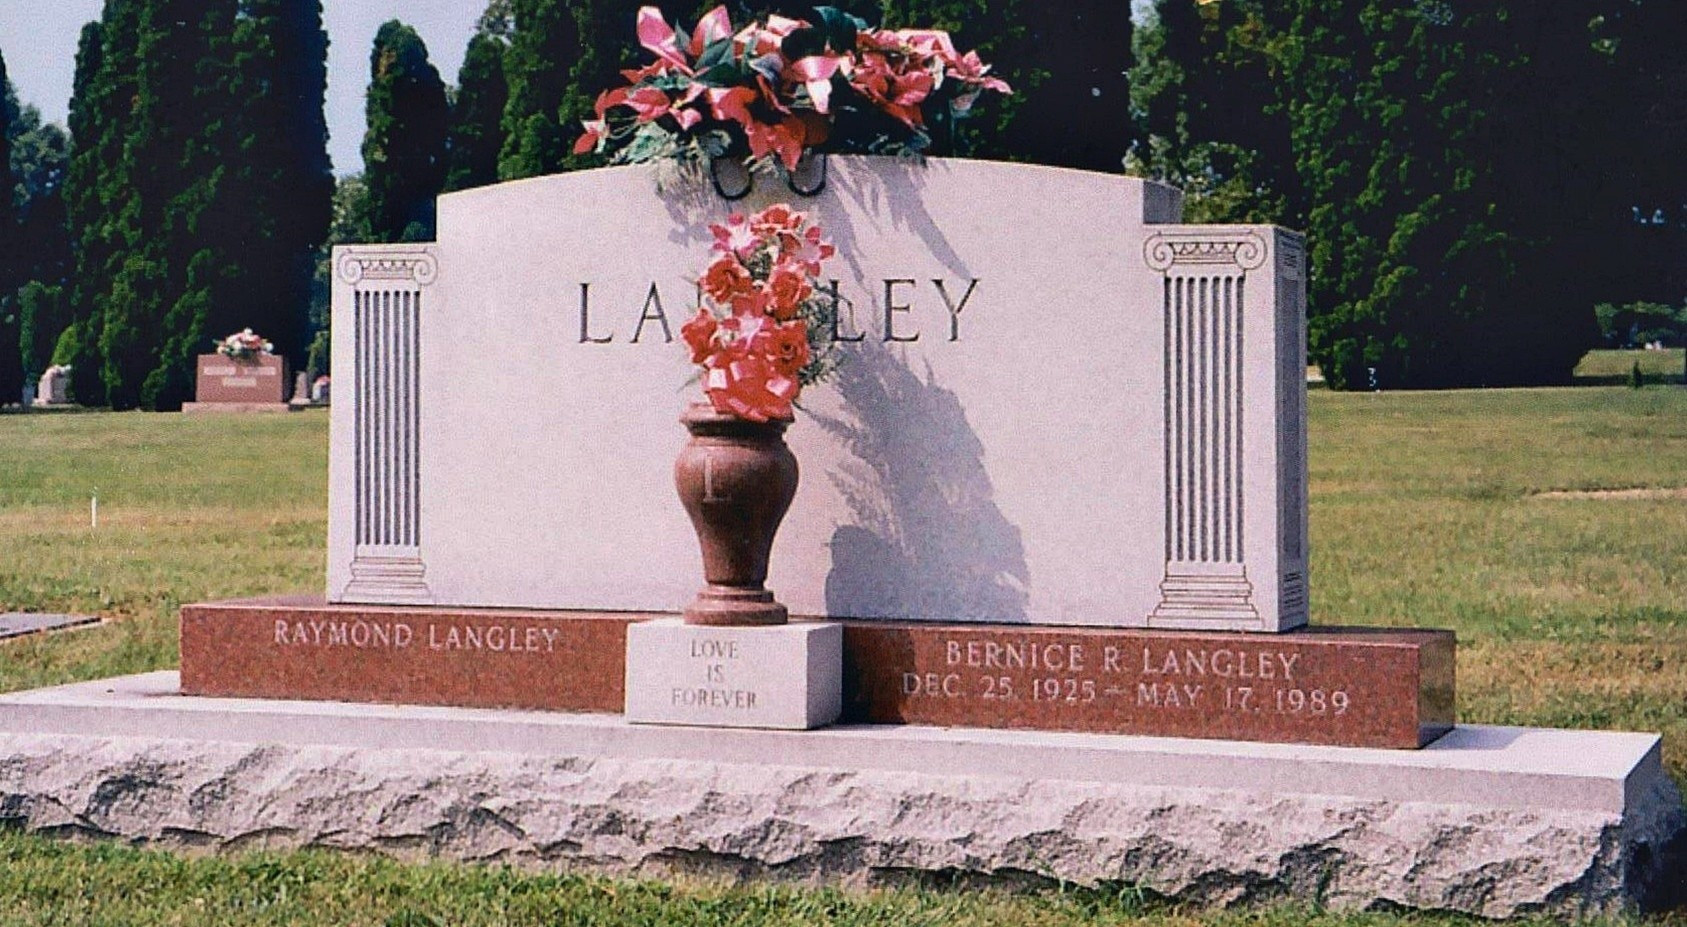 plastic flower vases for cemetery of images companion two person monuments markers monuments with regard to lovely gray and red with vase